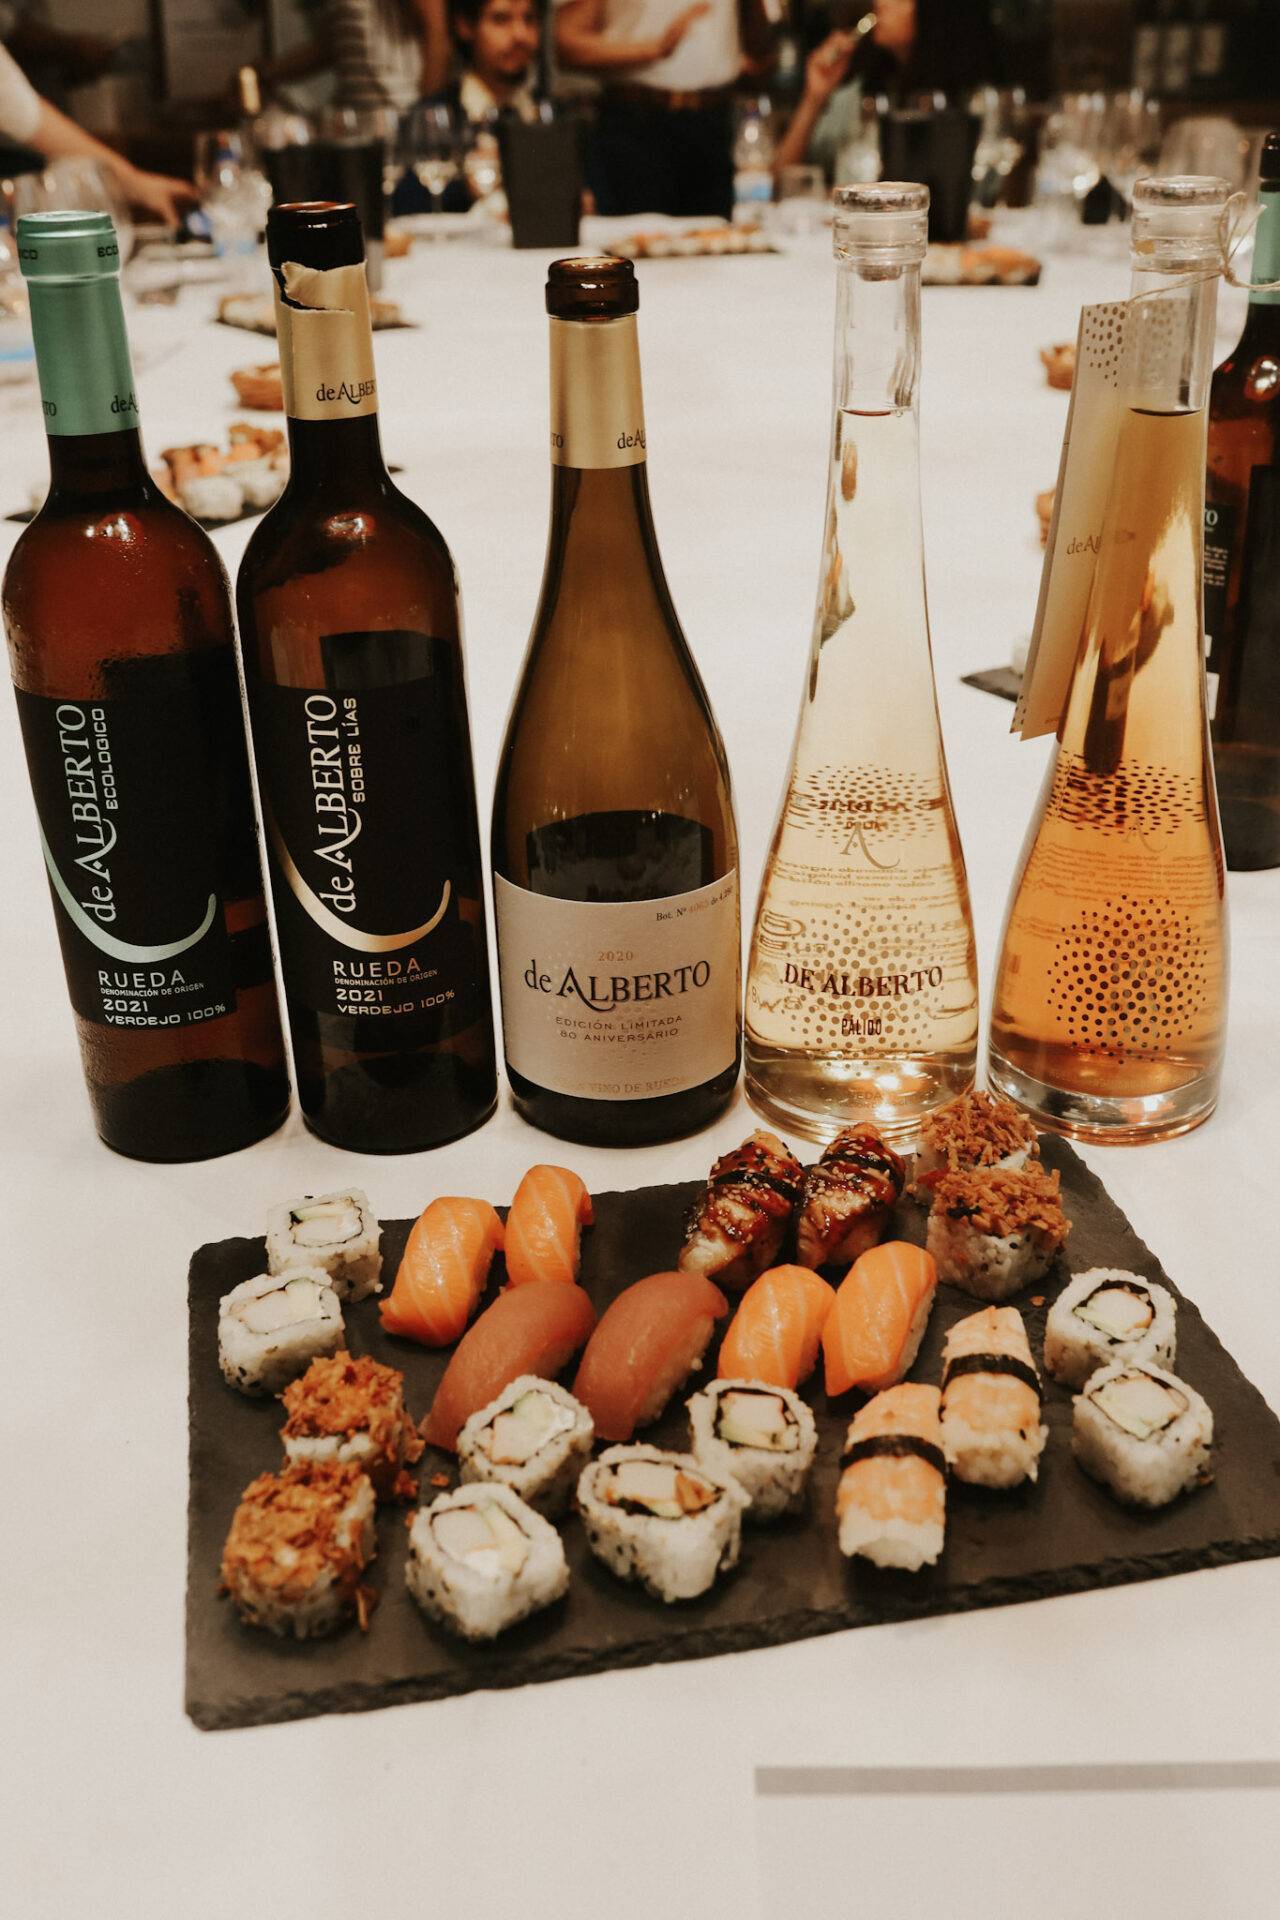 Rueda Verdejo wines paired with sushi